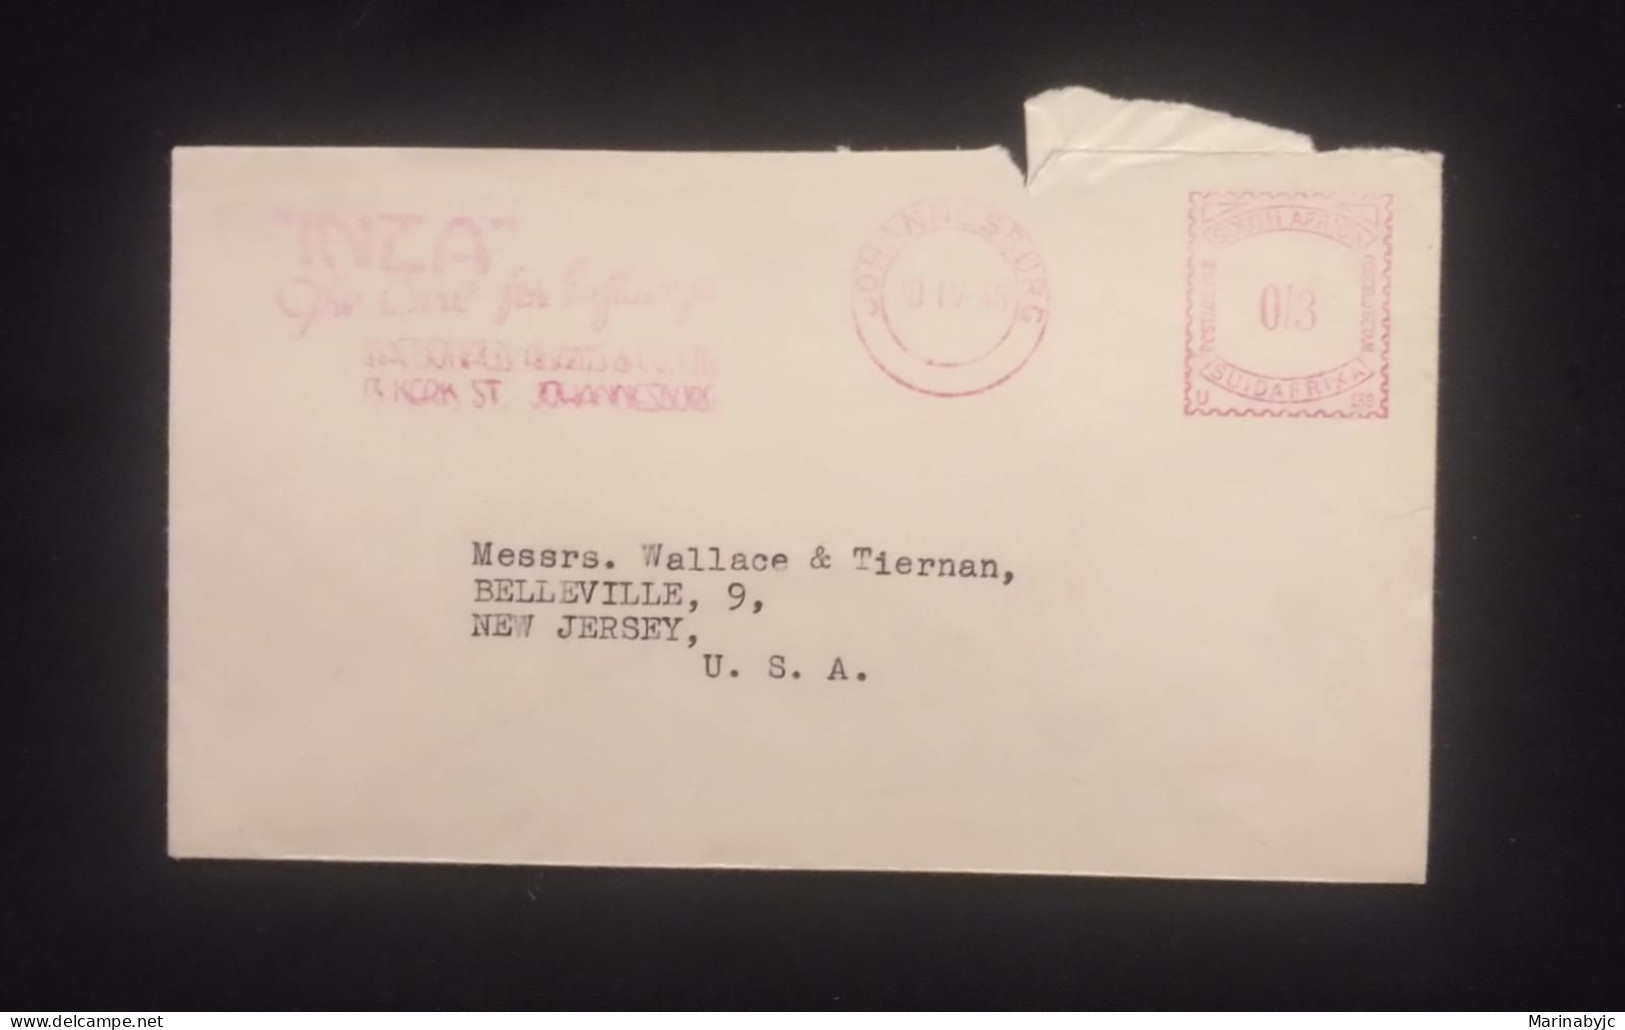 C) 1948. SOUTH AFRICA. AIRMAIL ENVELOPE SENT TO USA. 2ND CHOICE - Sonstige - Afrika